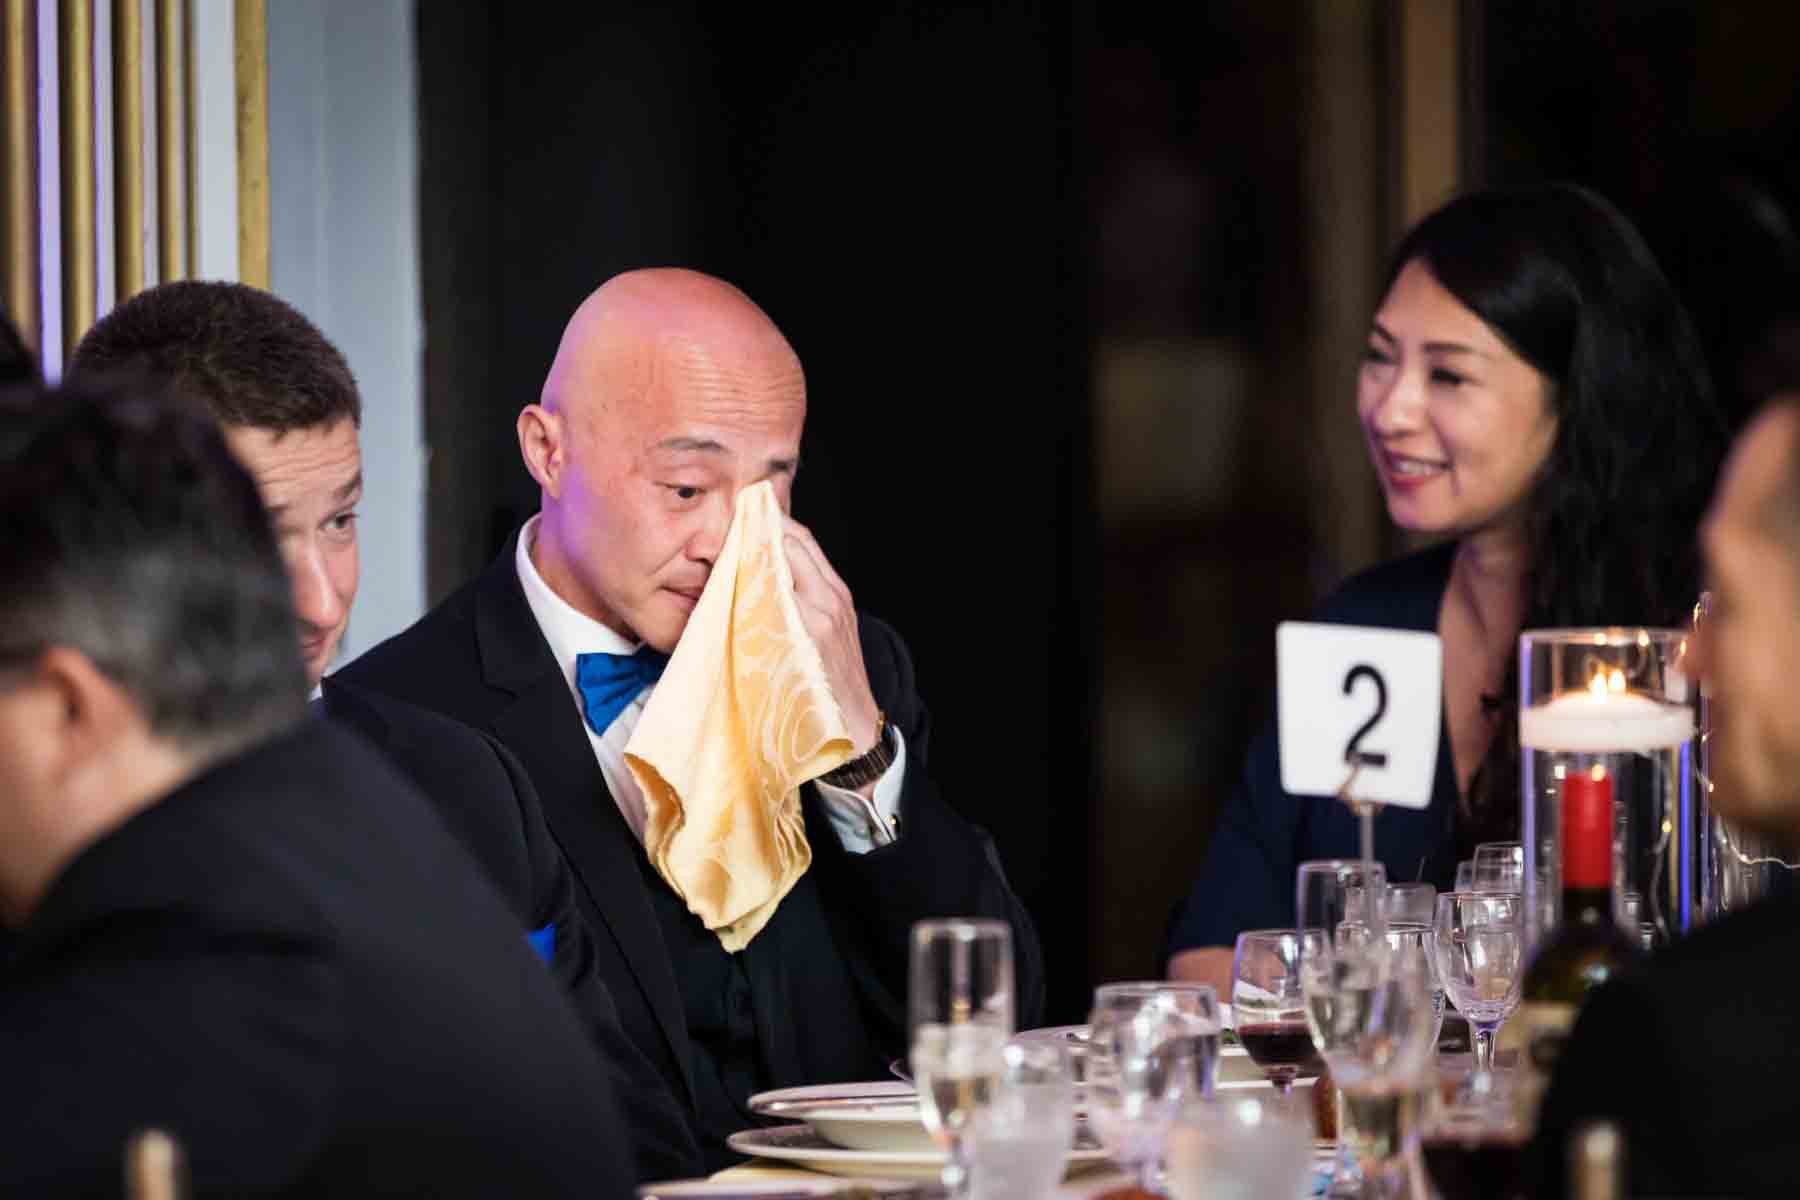 Bald Asian man using yellow napkin to wipe tears at a Terrace on the Park wedding